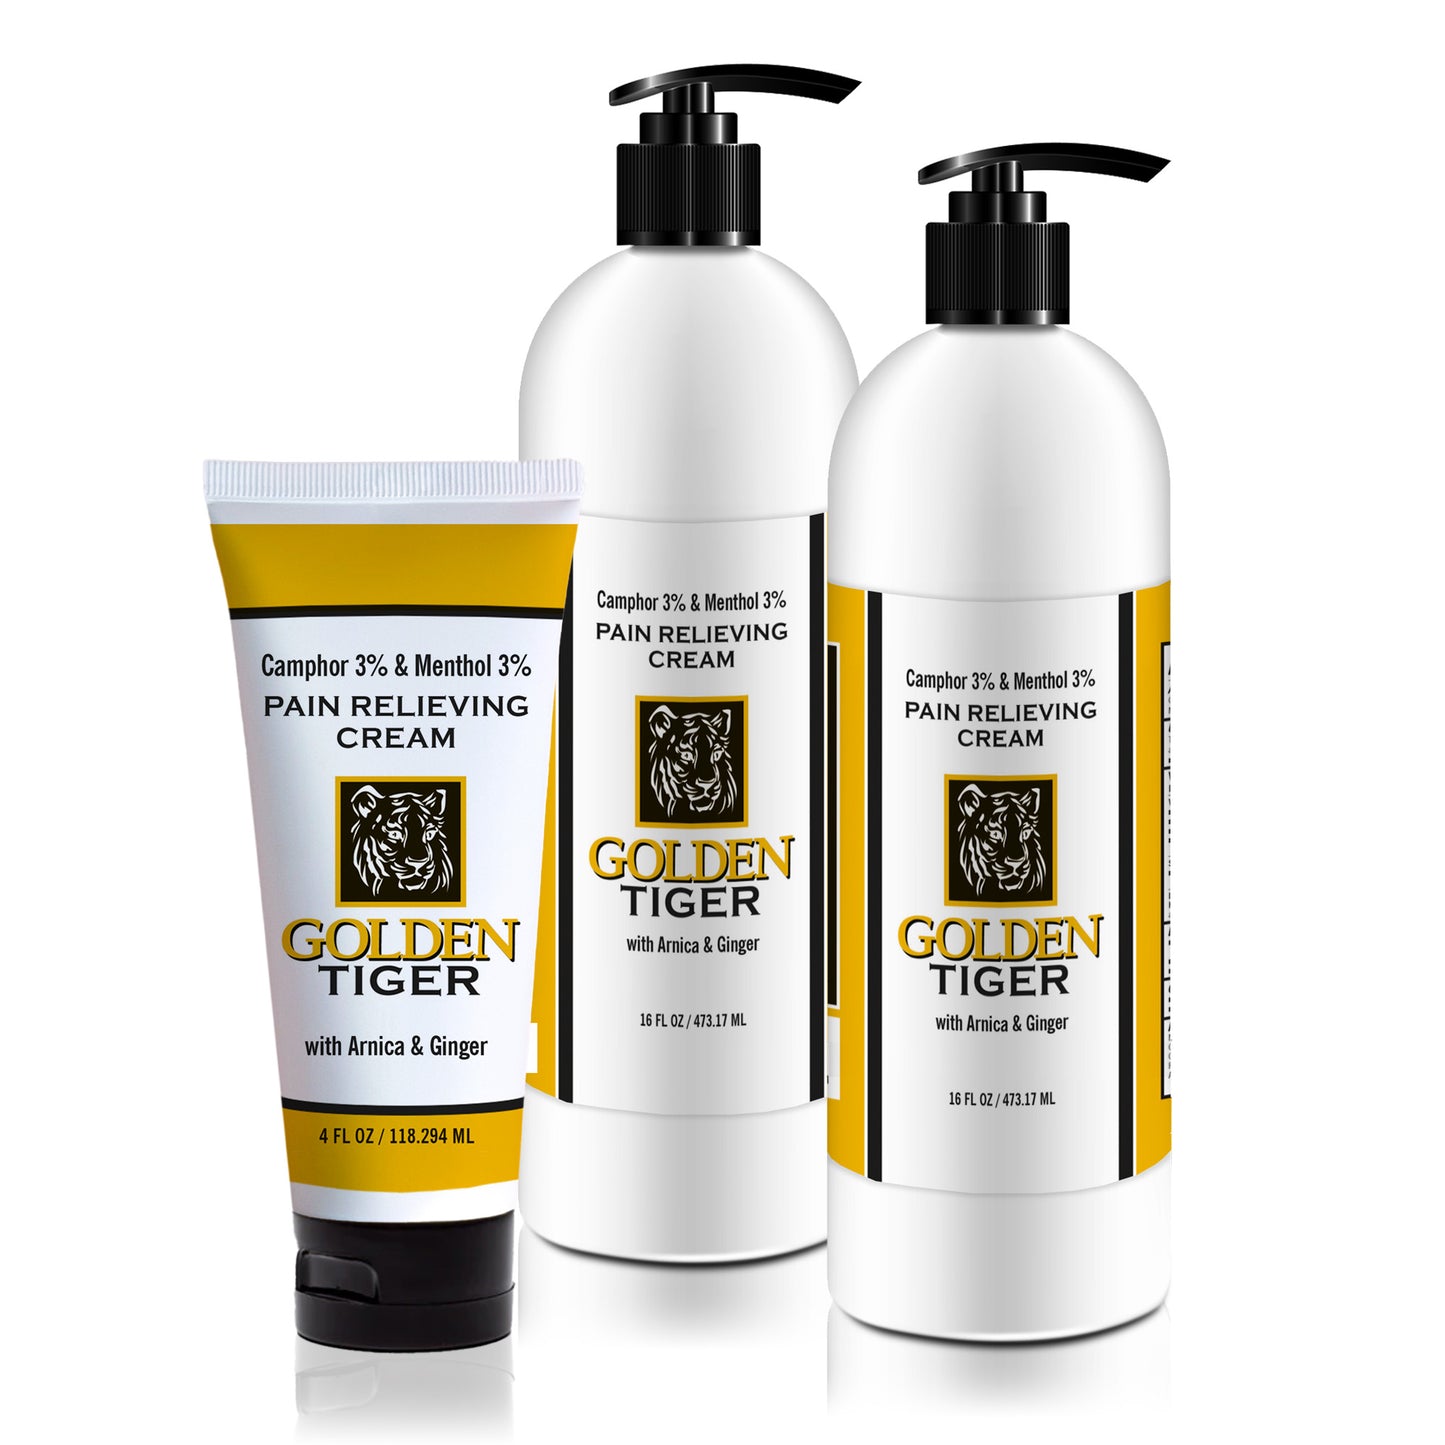 Golden Tiger Pain Relieving Cream - Buy 2 - 16oz Pumps,  get 1 Free 4oz Tube